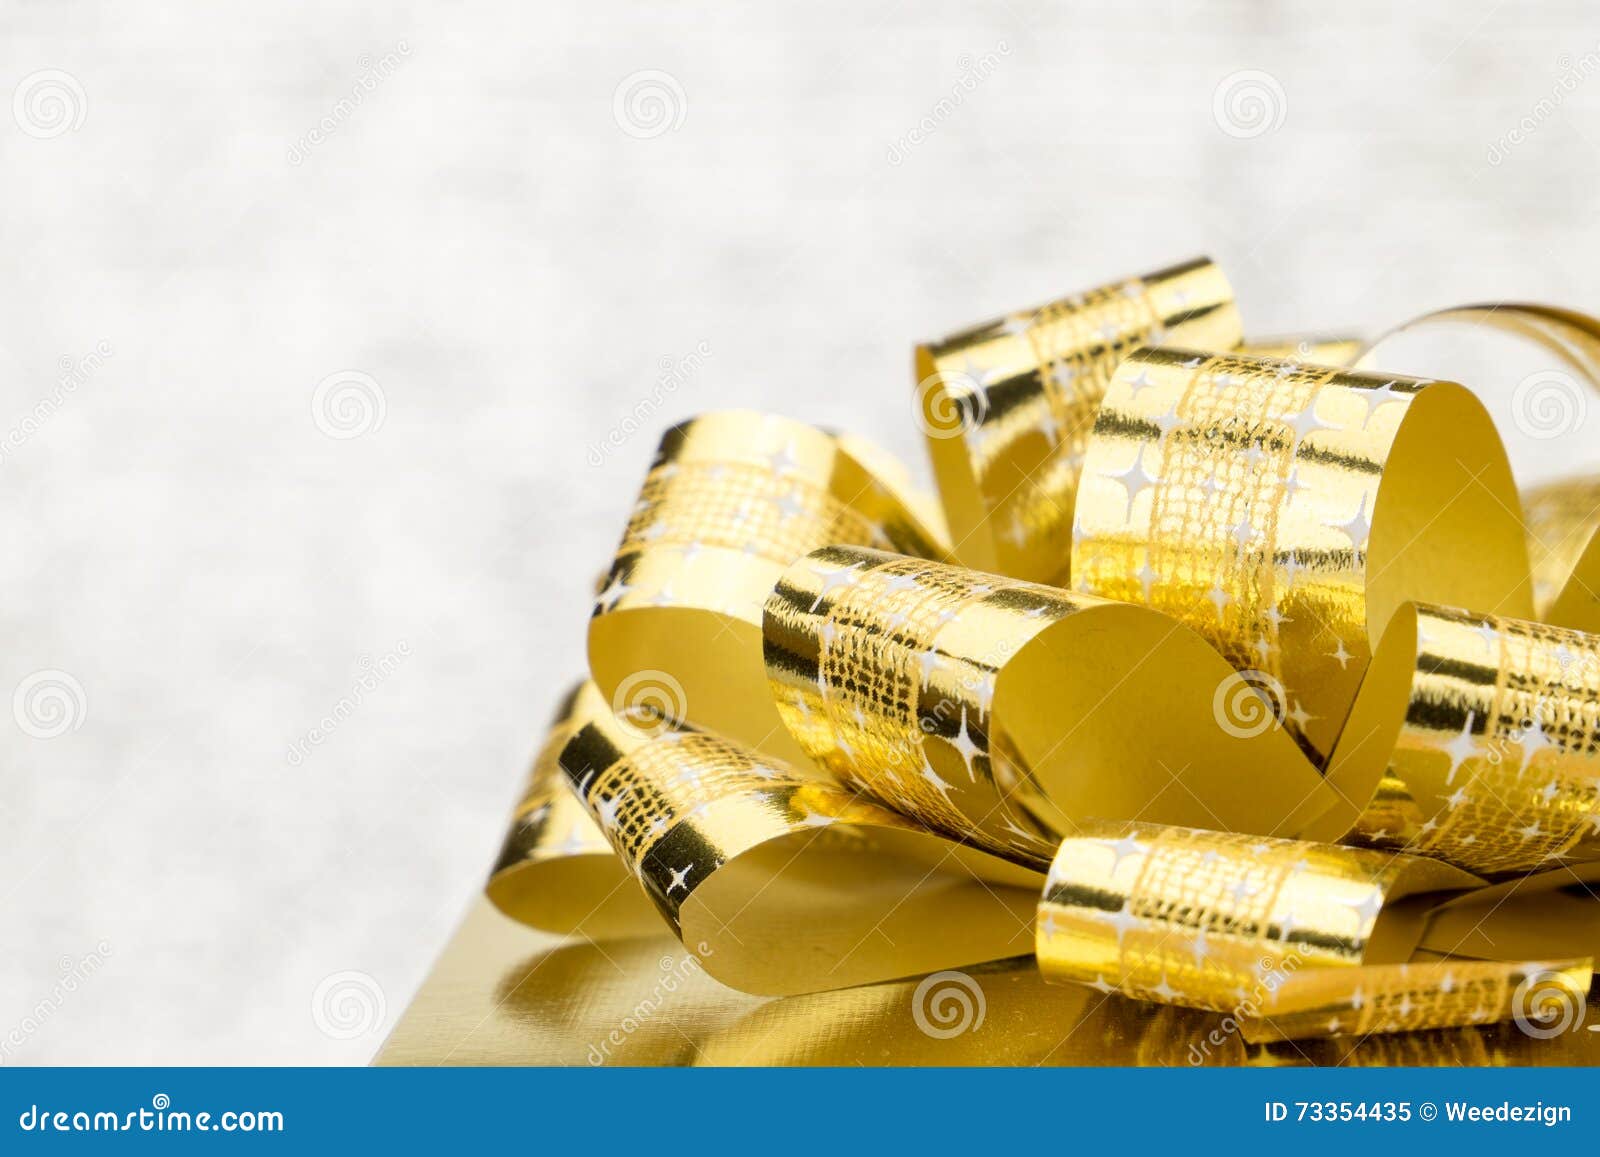 close up golden present box with big bow at bokeh white blur background